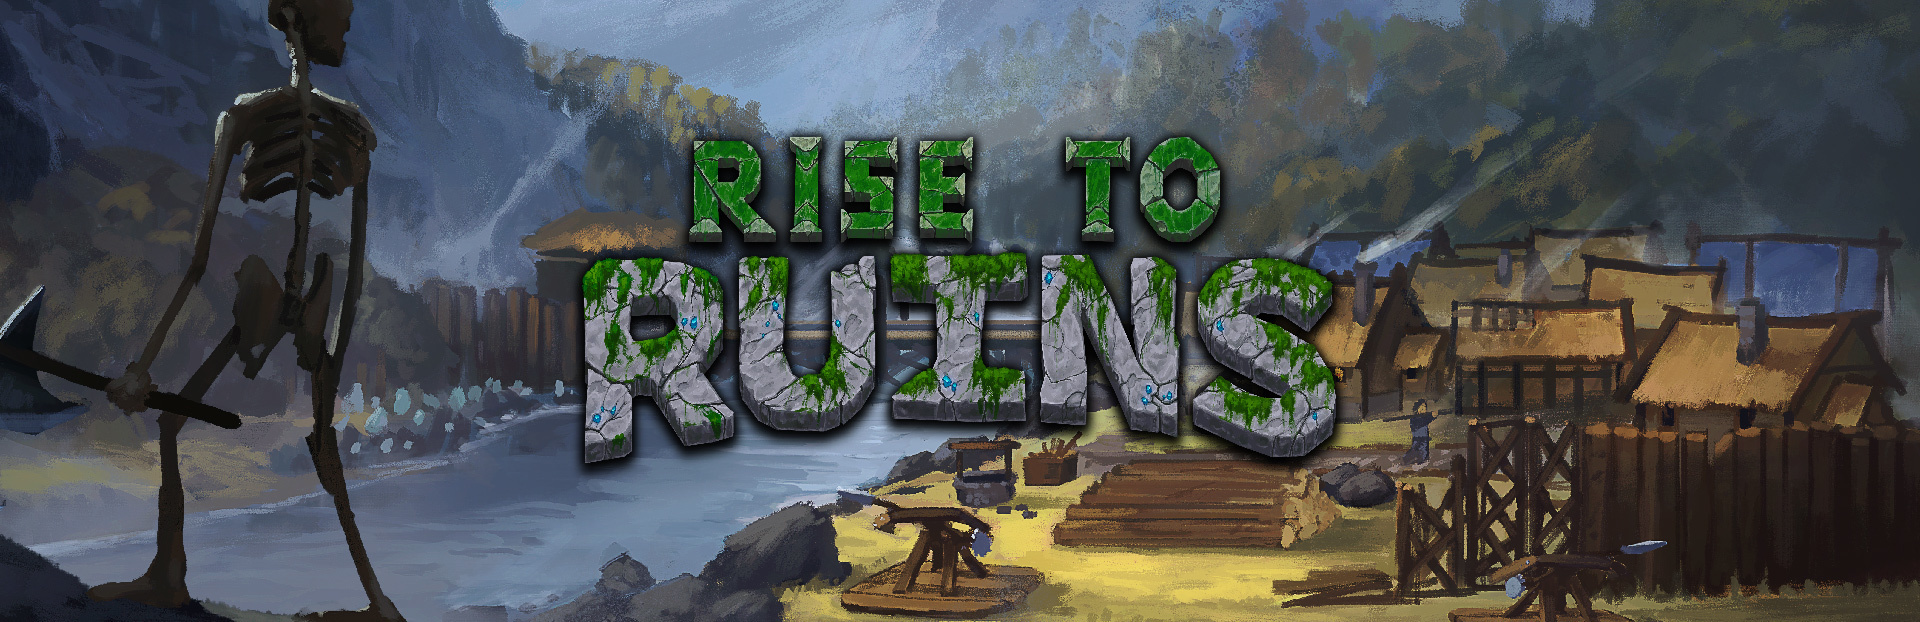 The developer of Rise to Ruins is absolutely mad and has secured funding  for their games